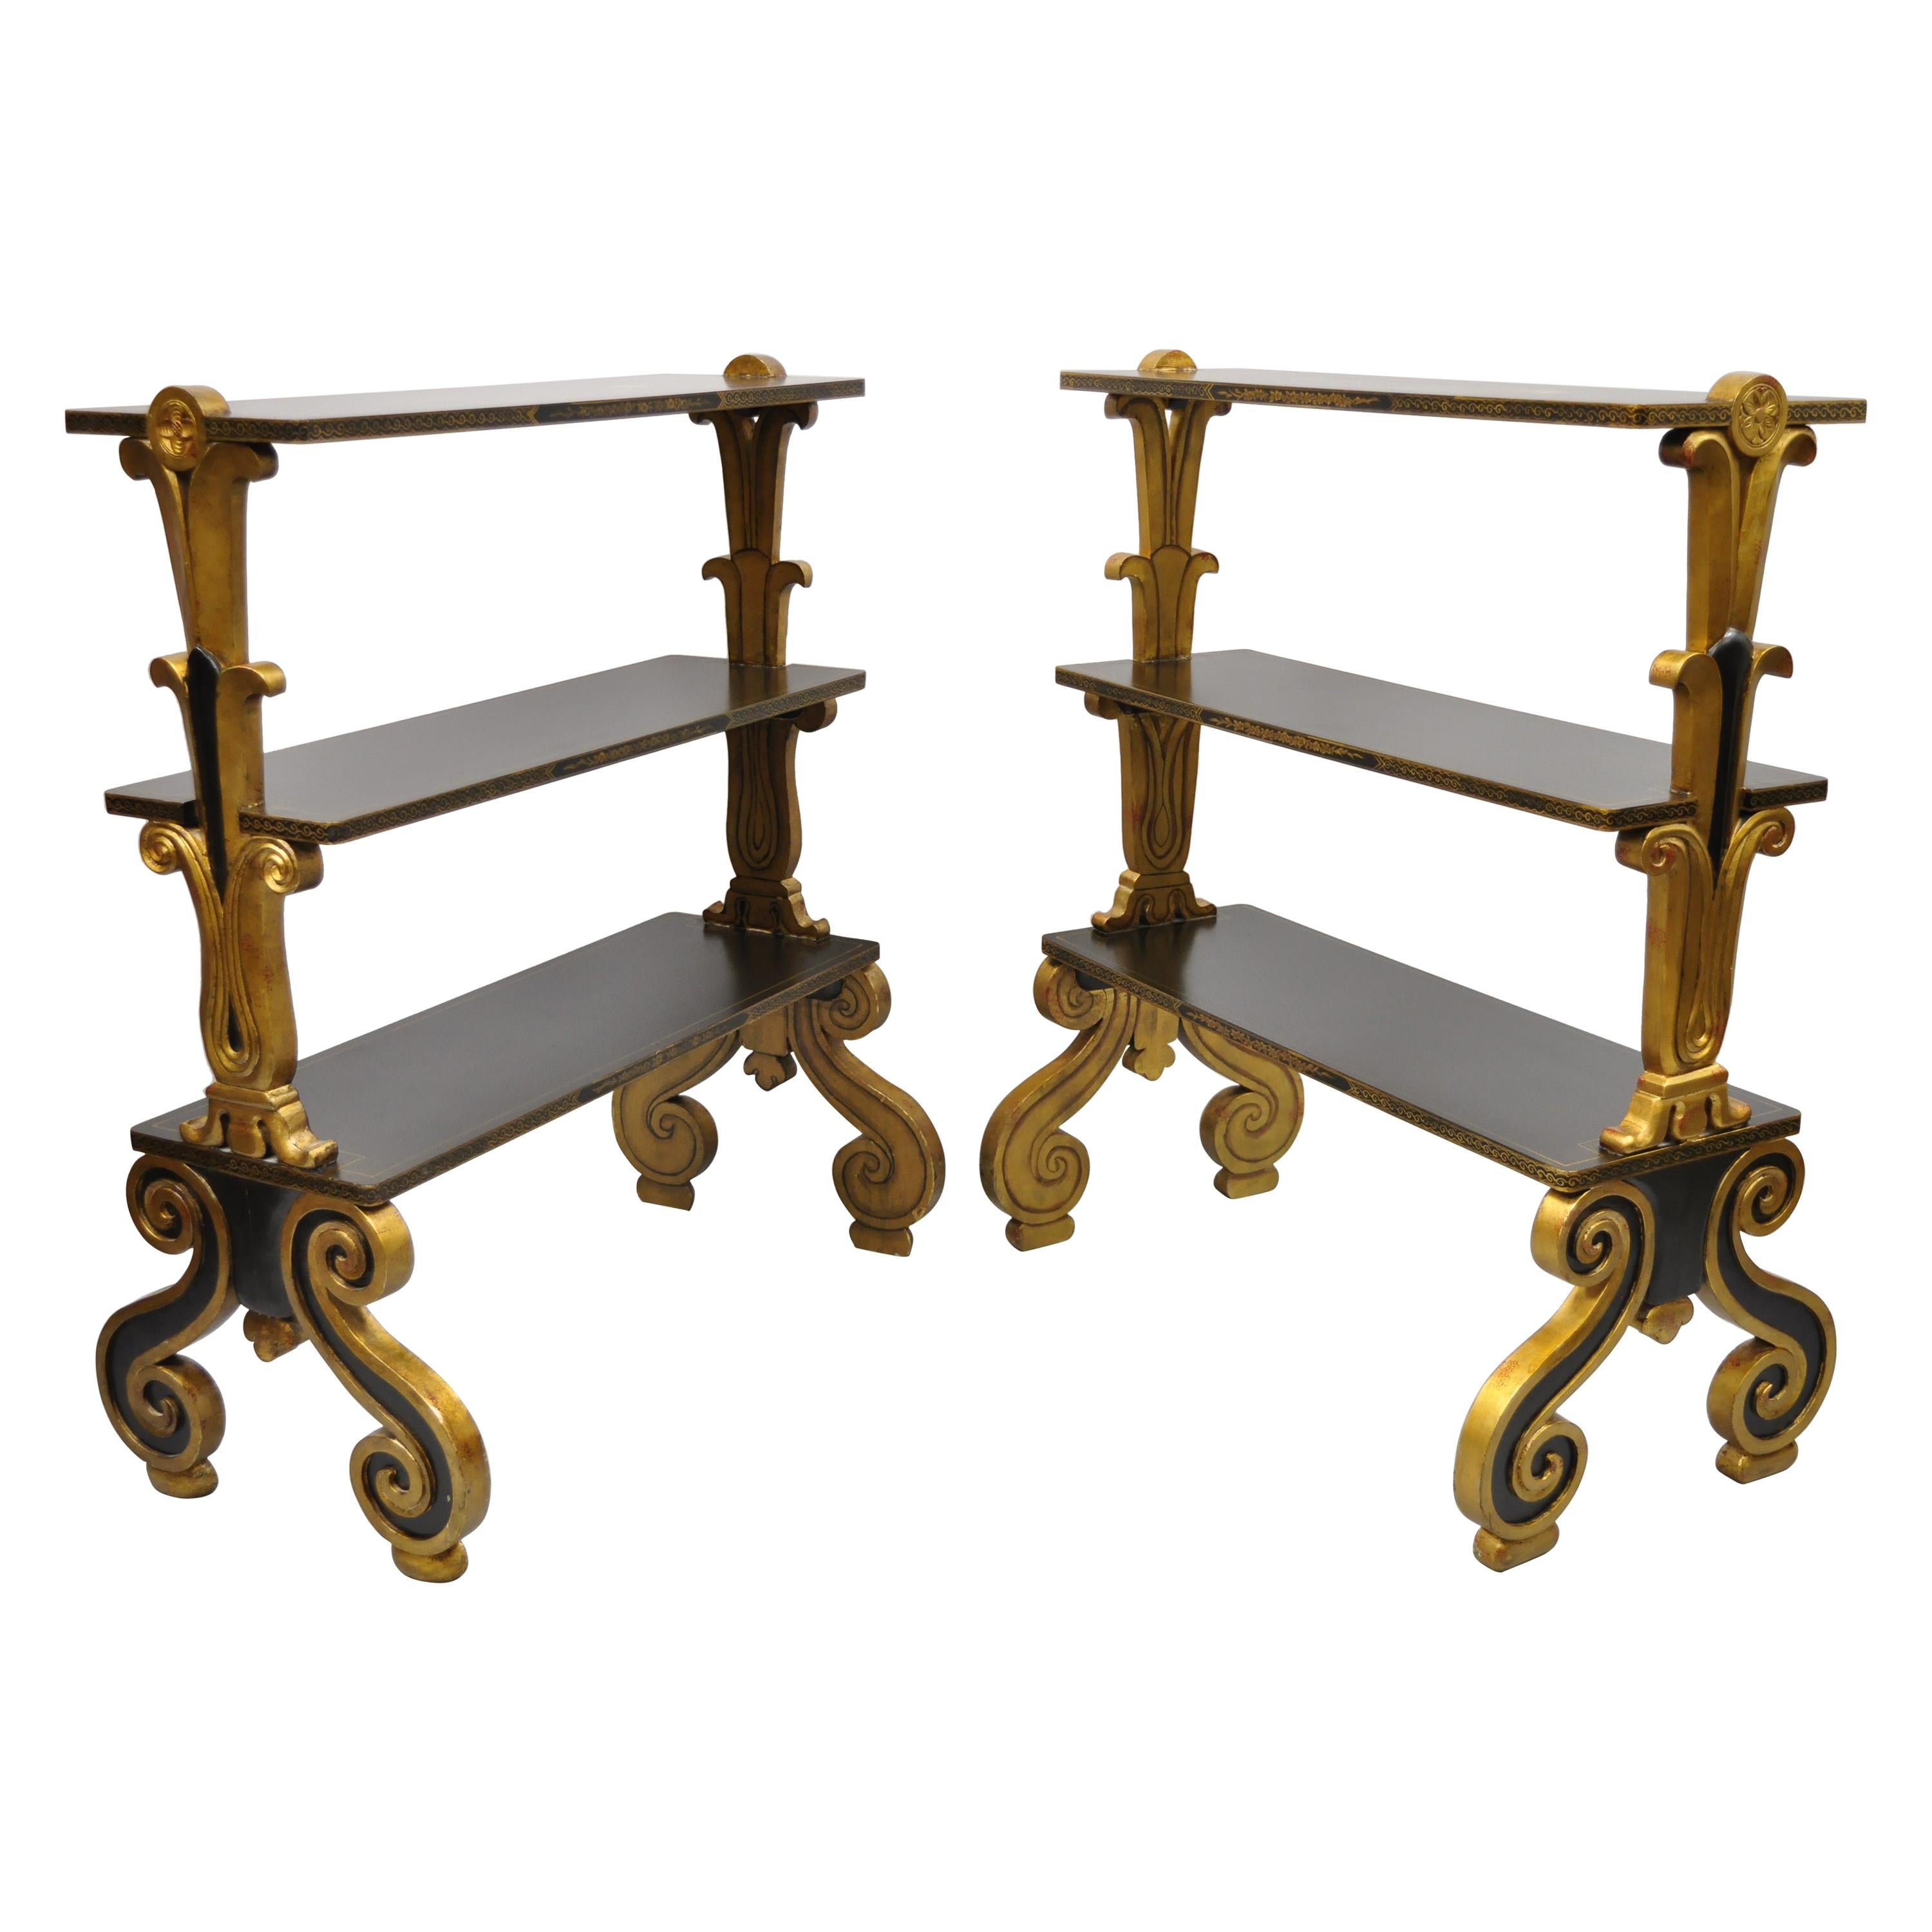 Regency Style Black & Gold 3 Tier Whatnot Stands Bookcase Shelves Curio, a Pair For Sale